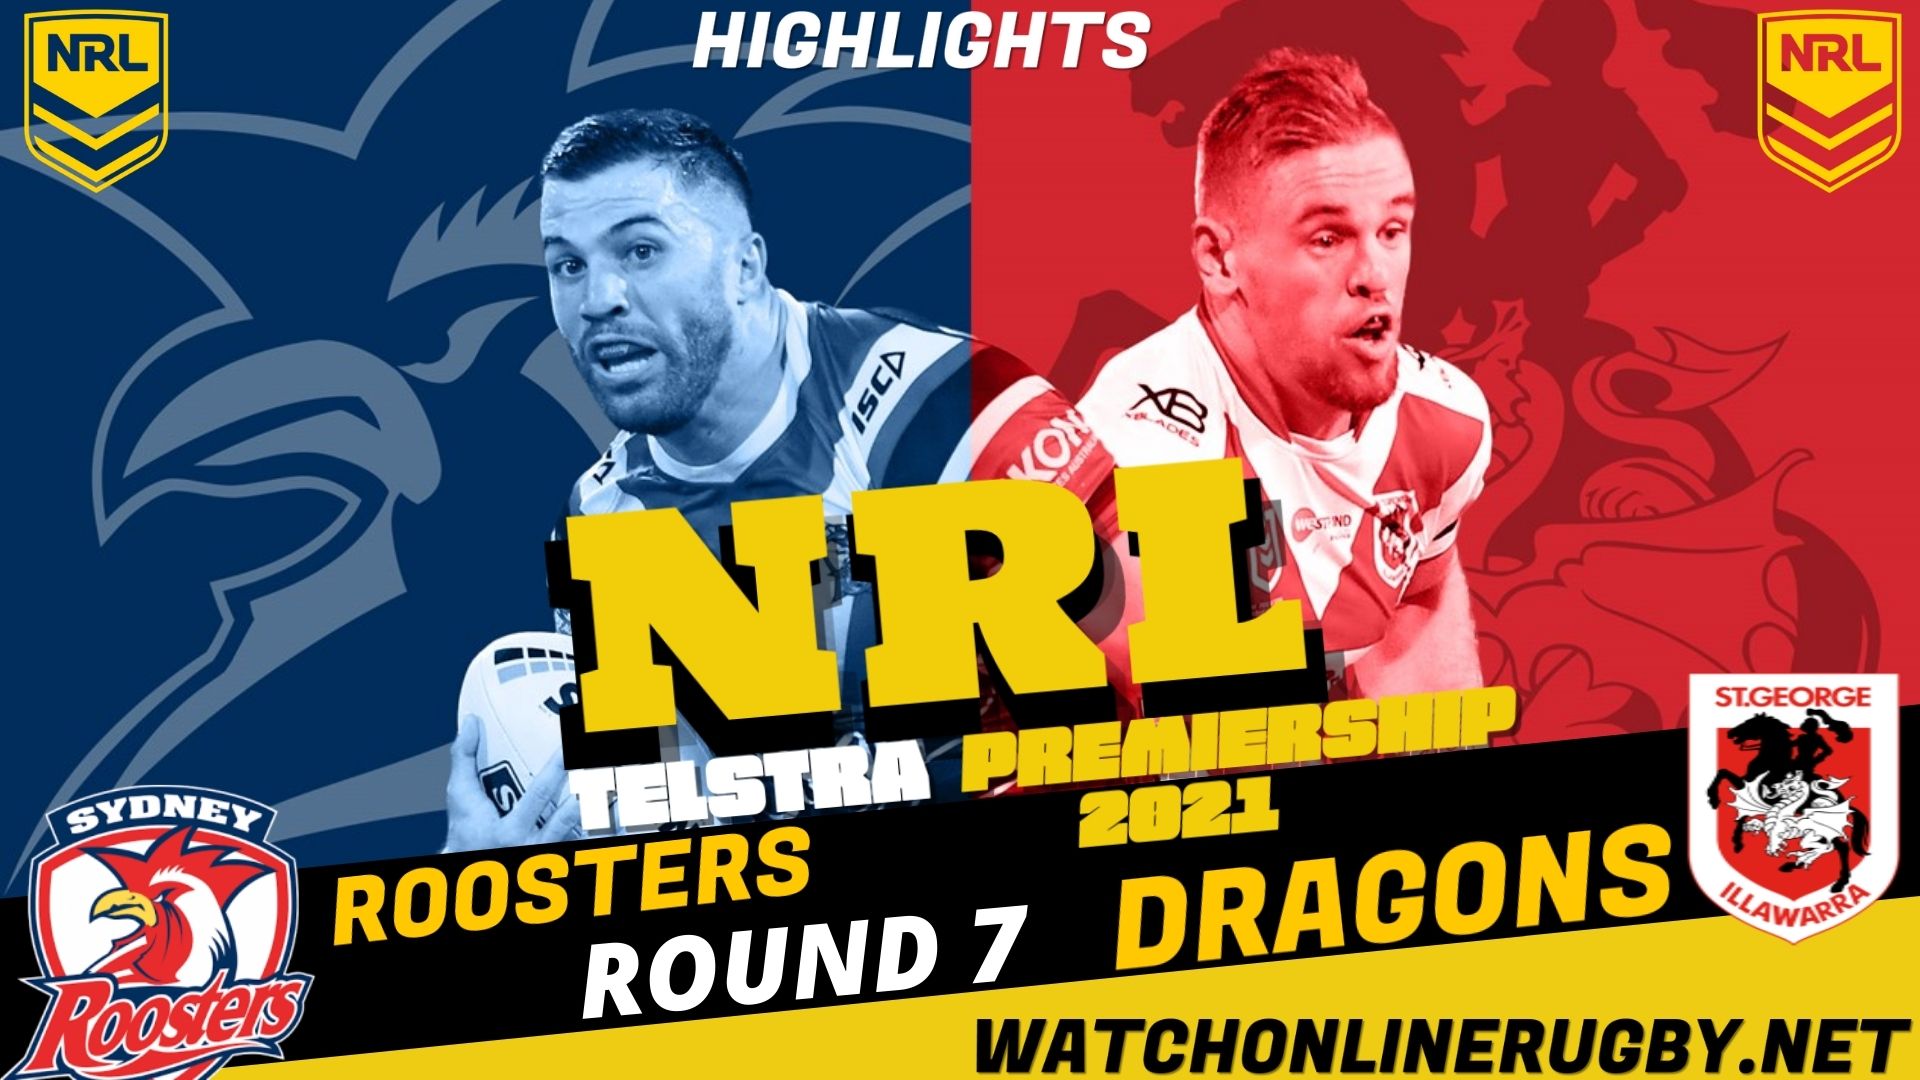 Roosters Vs Dragons Highlights RD 7 NRL Rugby